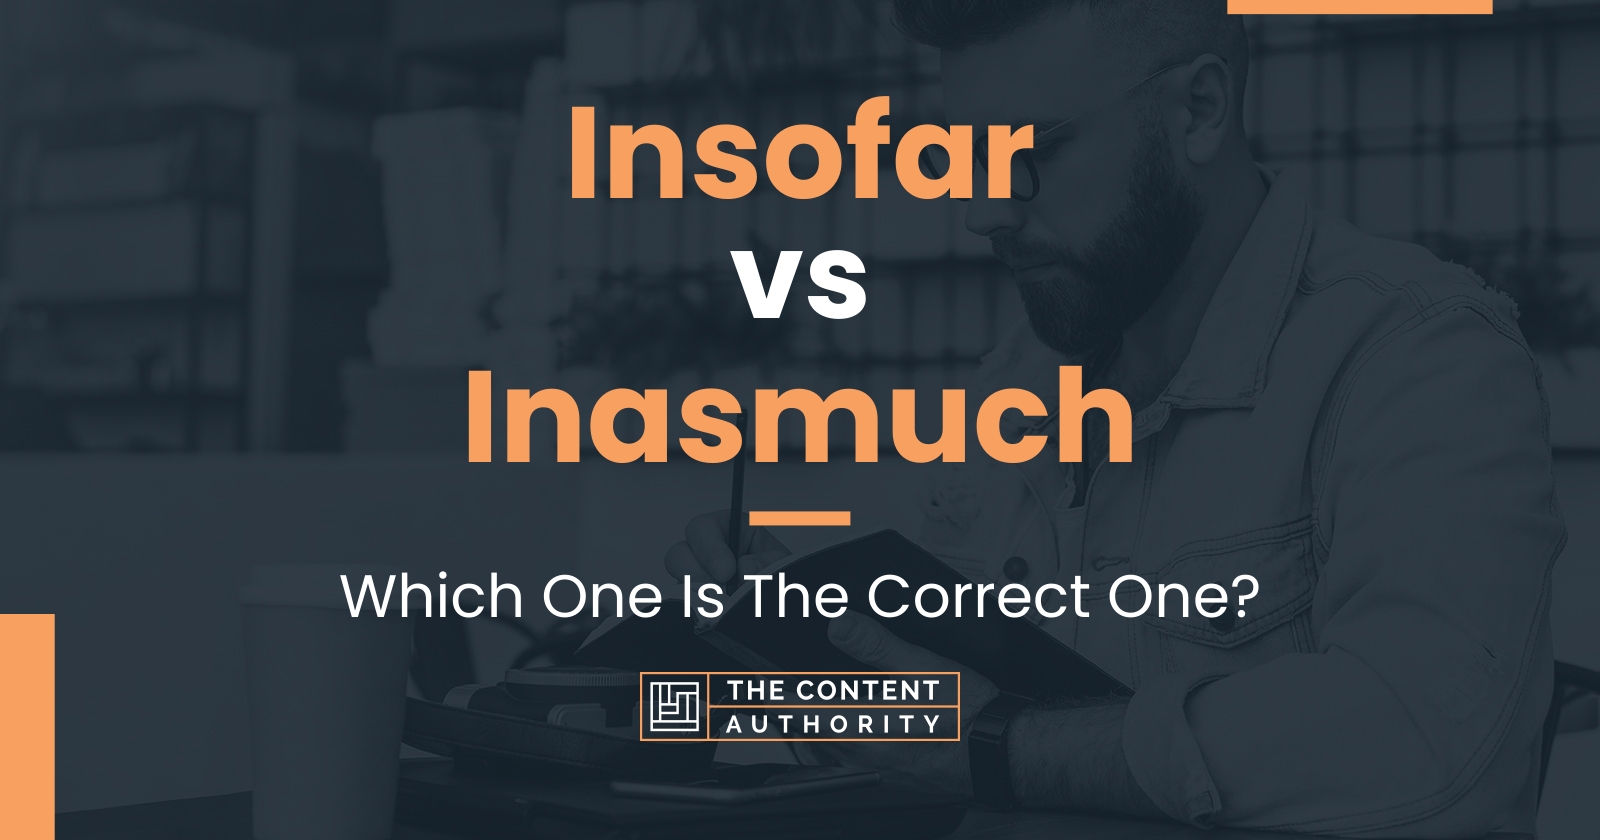 Insofar vs Inasmuch: Which One Is The Correct One?